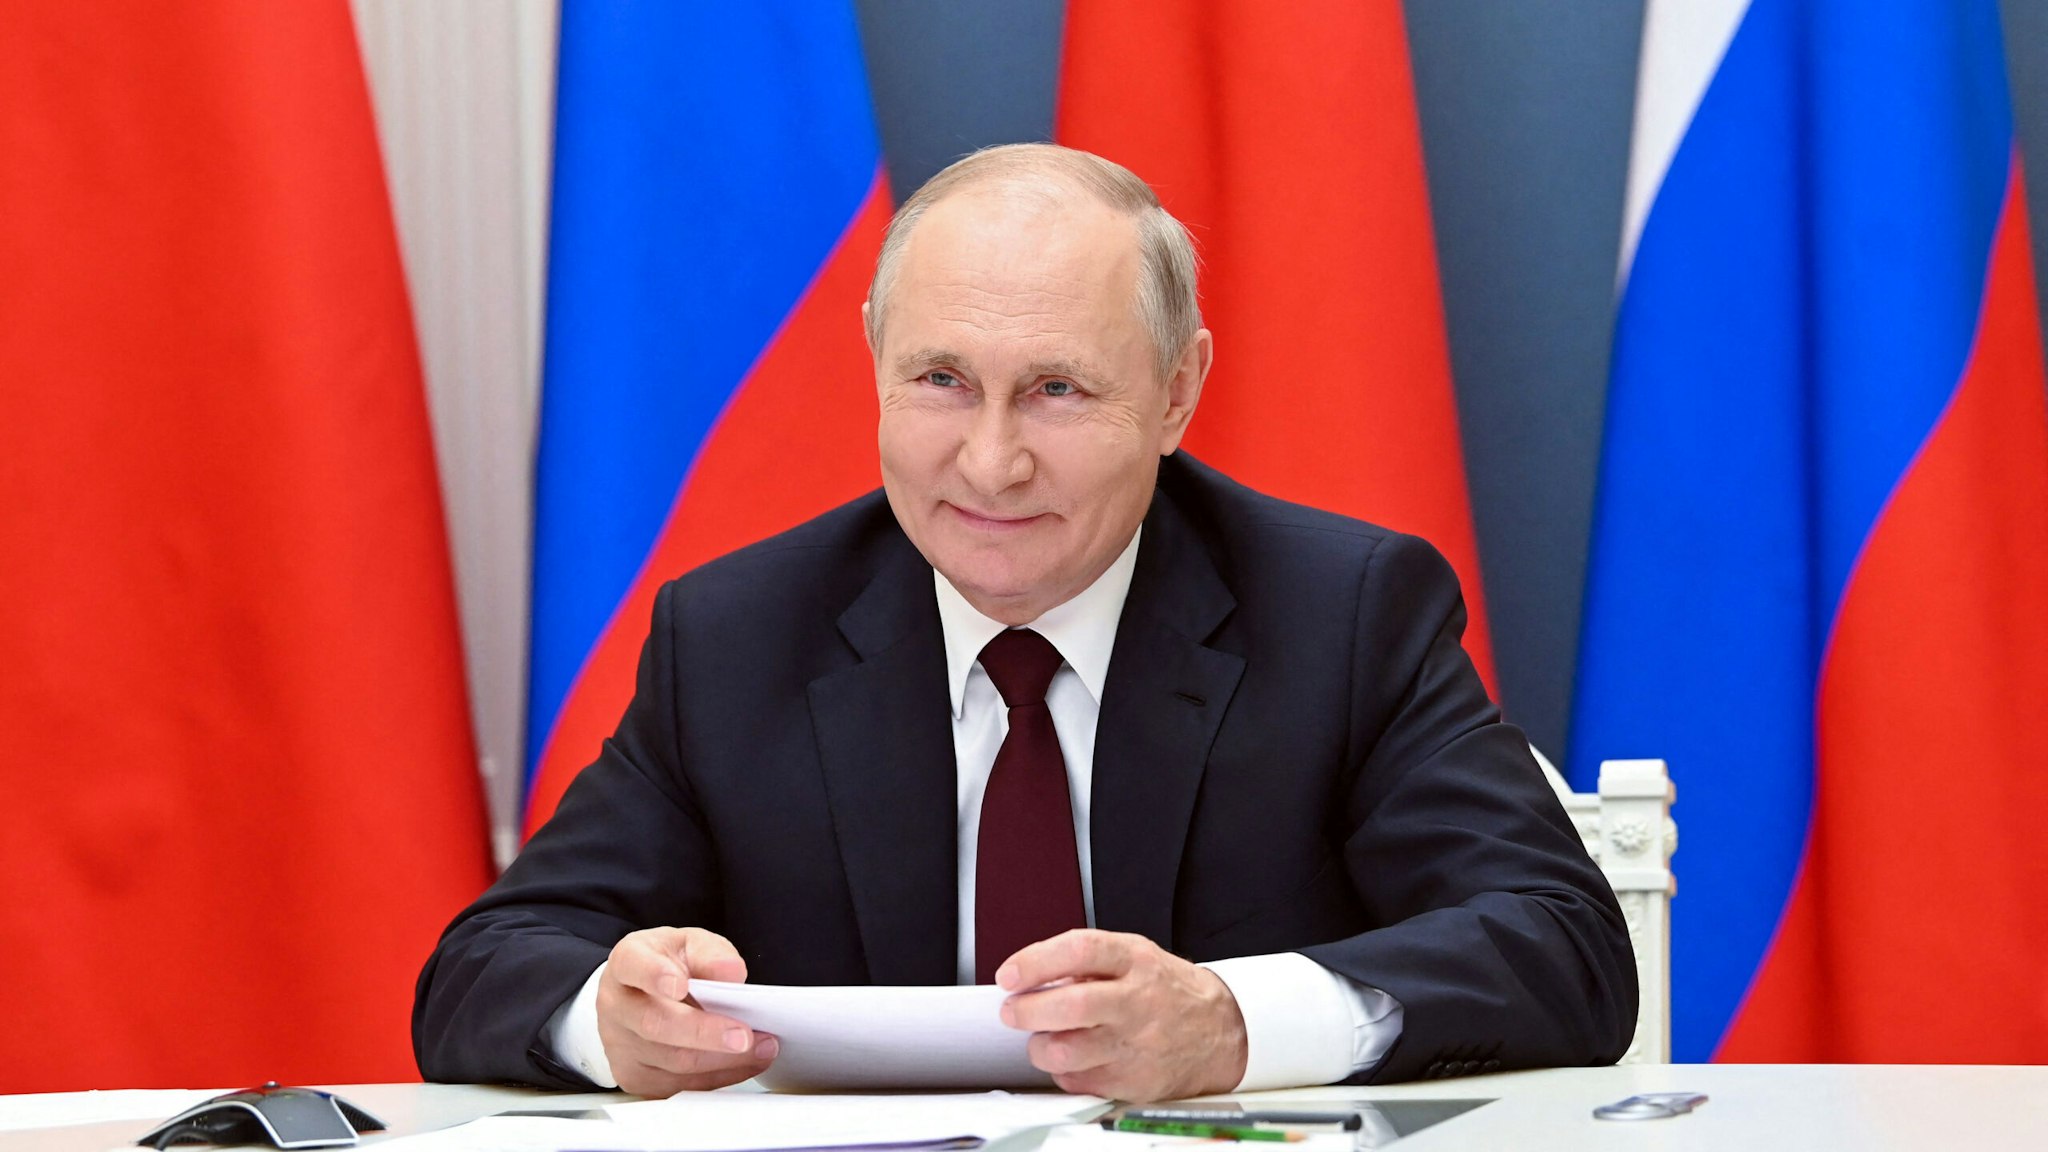 Russian President Vladimir Putin holds a meeting via video conference with Chinese President Xi Jinping (not seeen) at the Kremlin in Moscow on June 28, 2021.